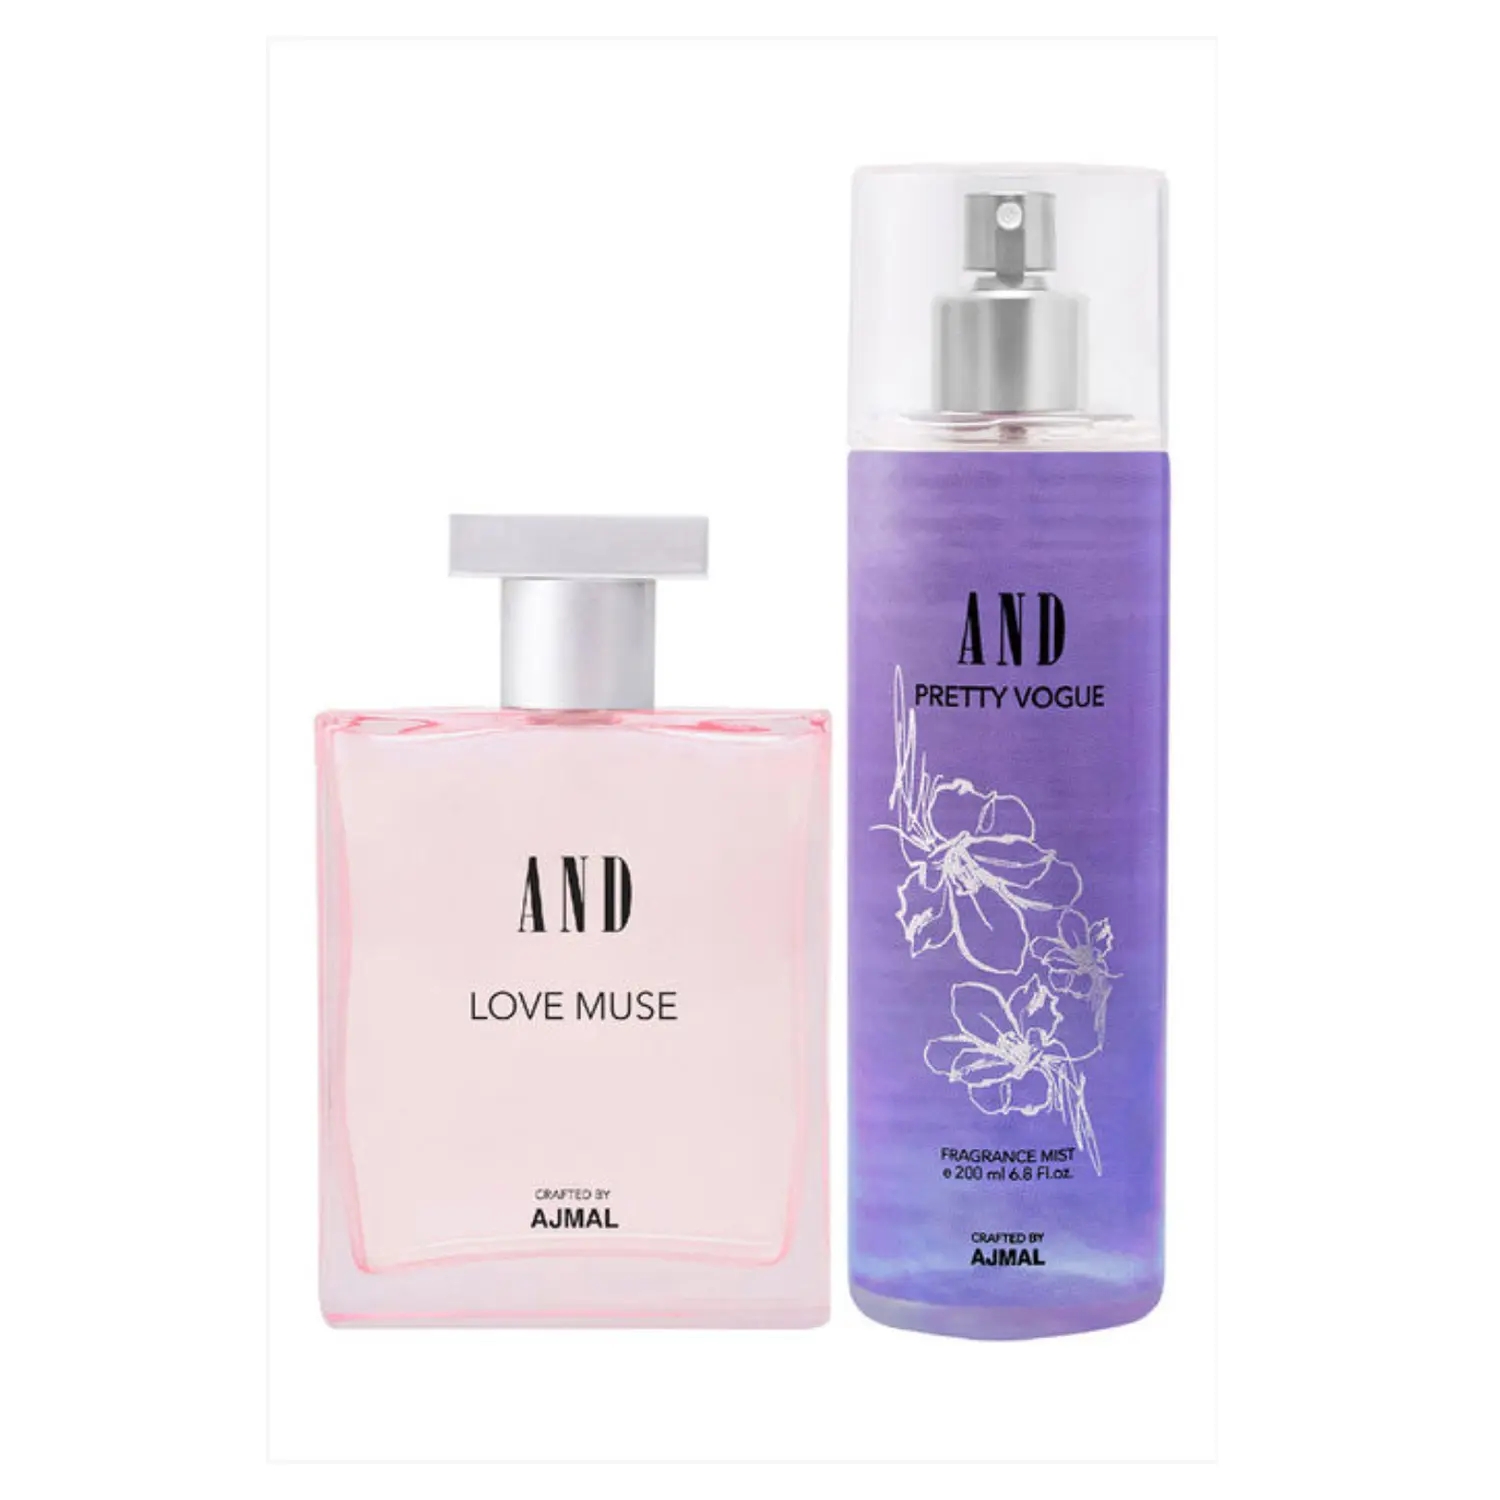 AND | AND Love Muse EDP & Pretty Vogue Mist - (2Pcs)